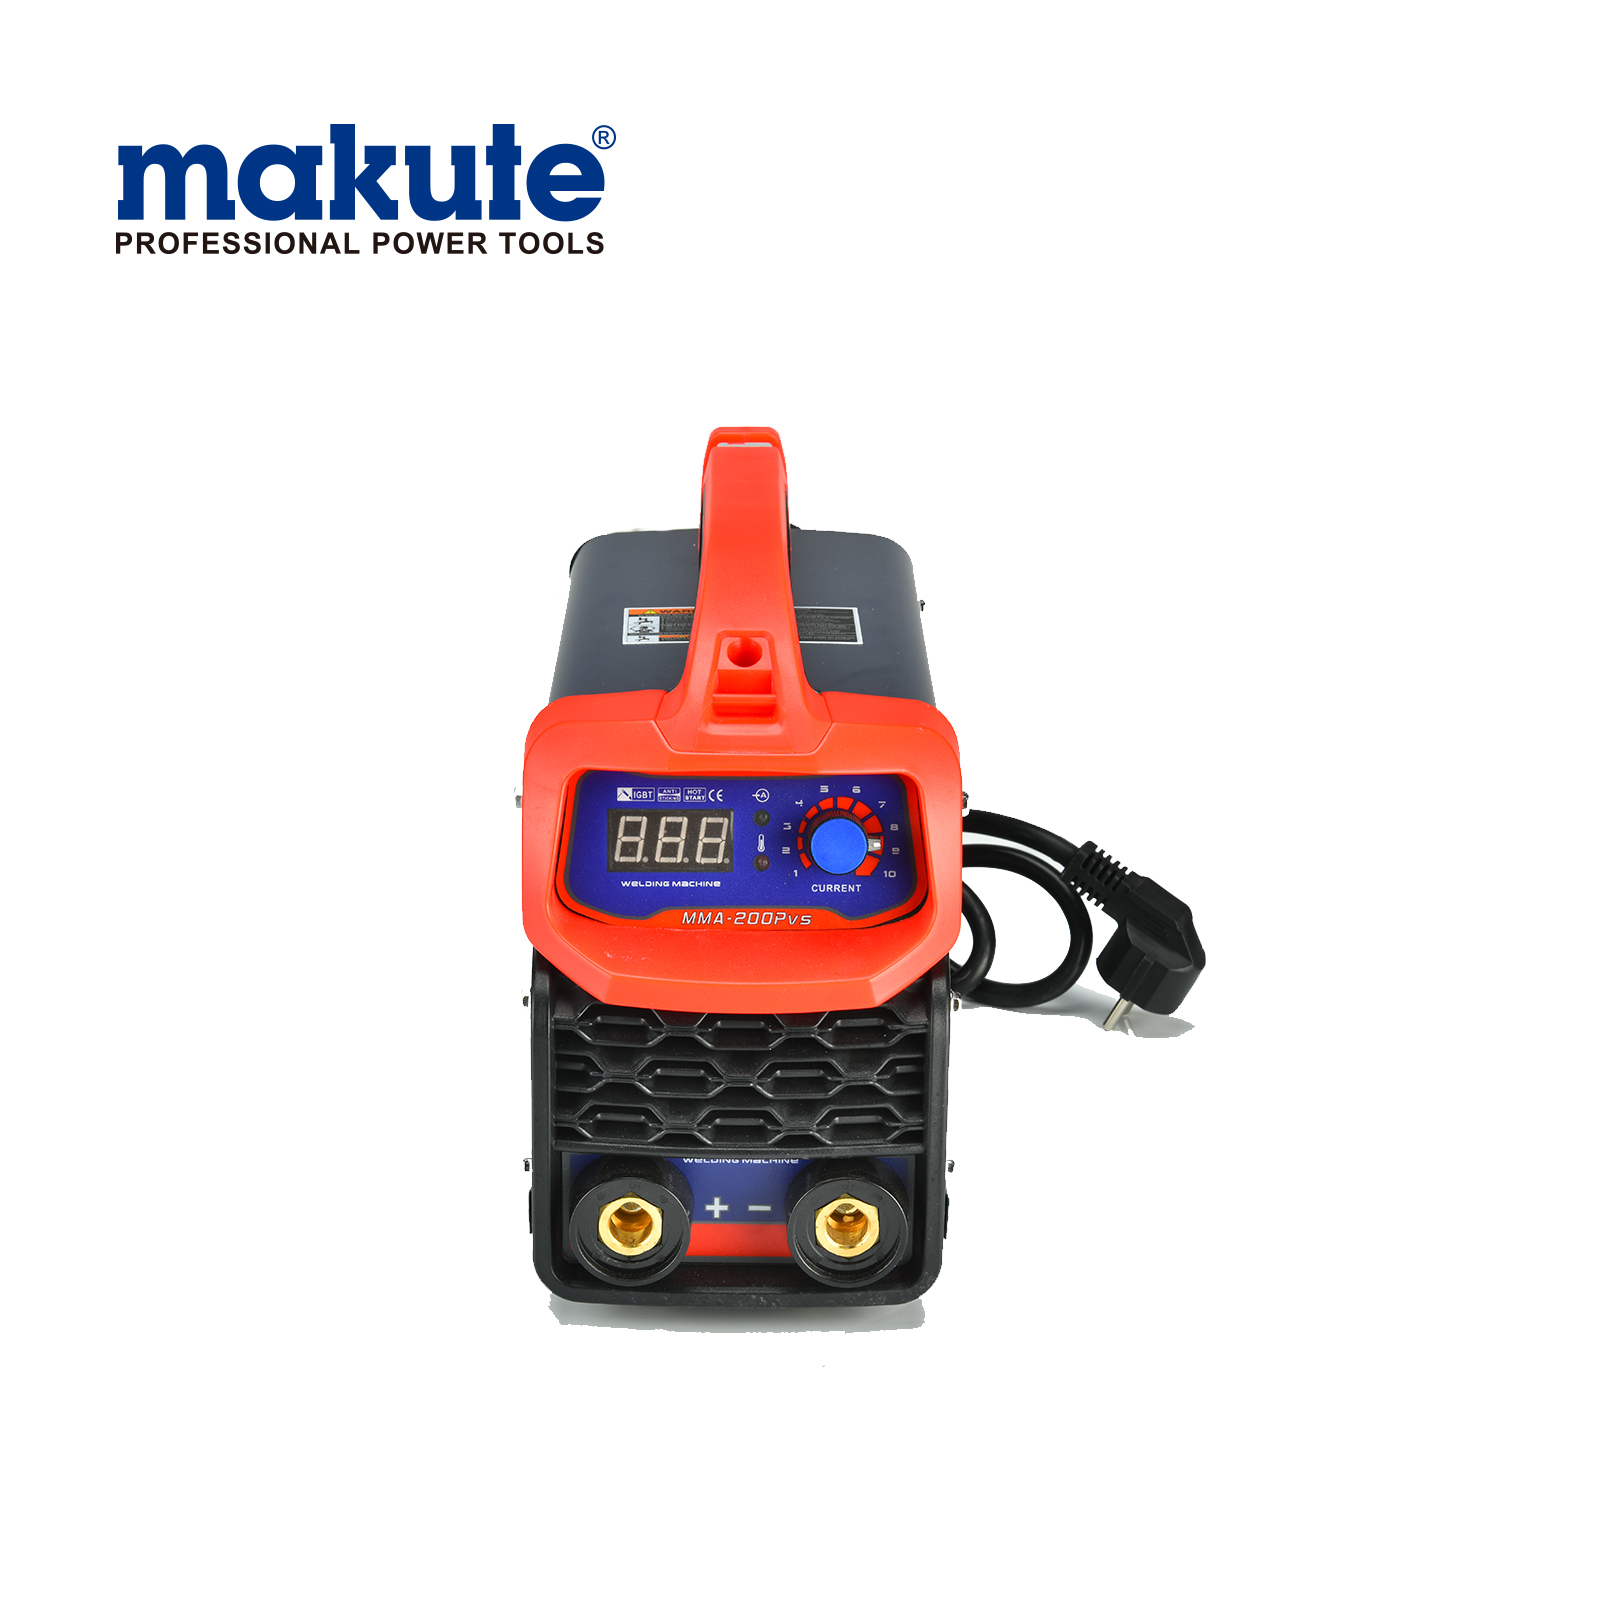 welding machine makute Easy To Operate Welding Machine MMA-200PVS Dual Voltage- small quick connector